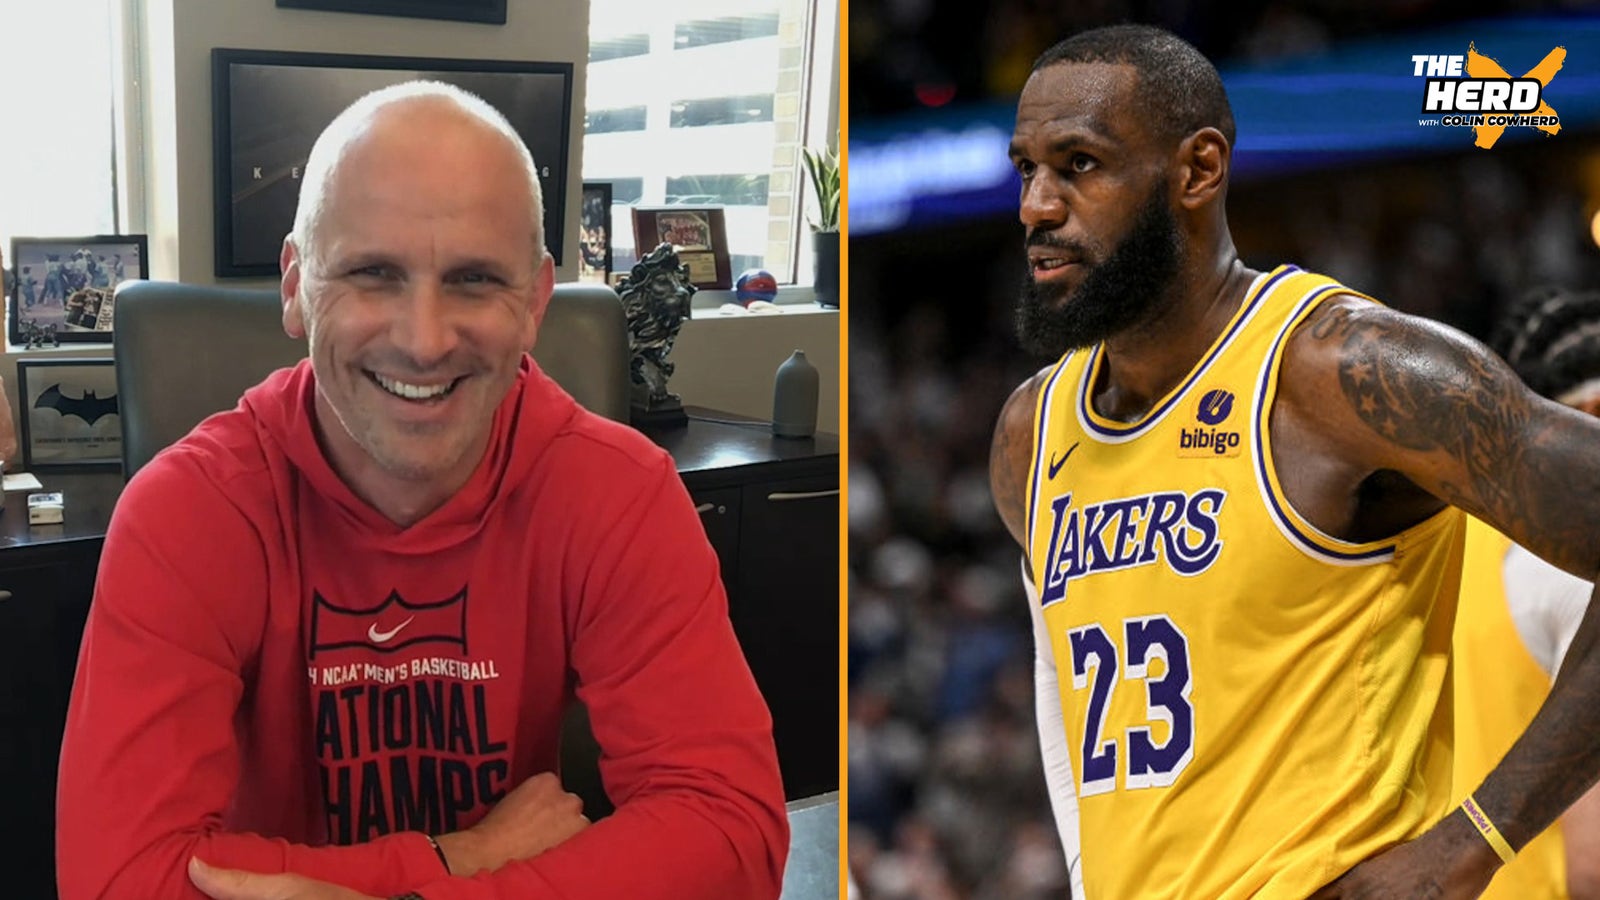 Dan Hurley reveals text messages with LeBron while being courted by Lakers